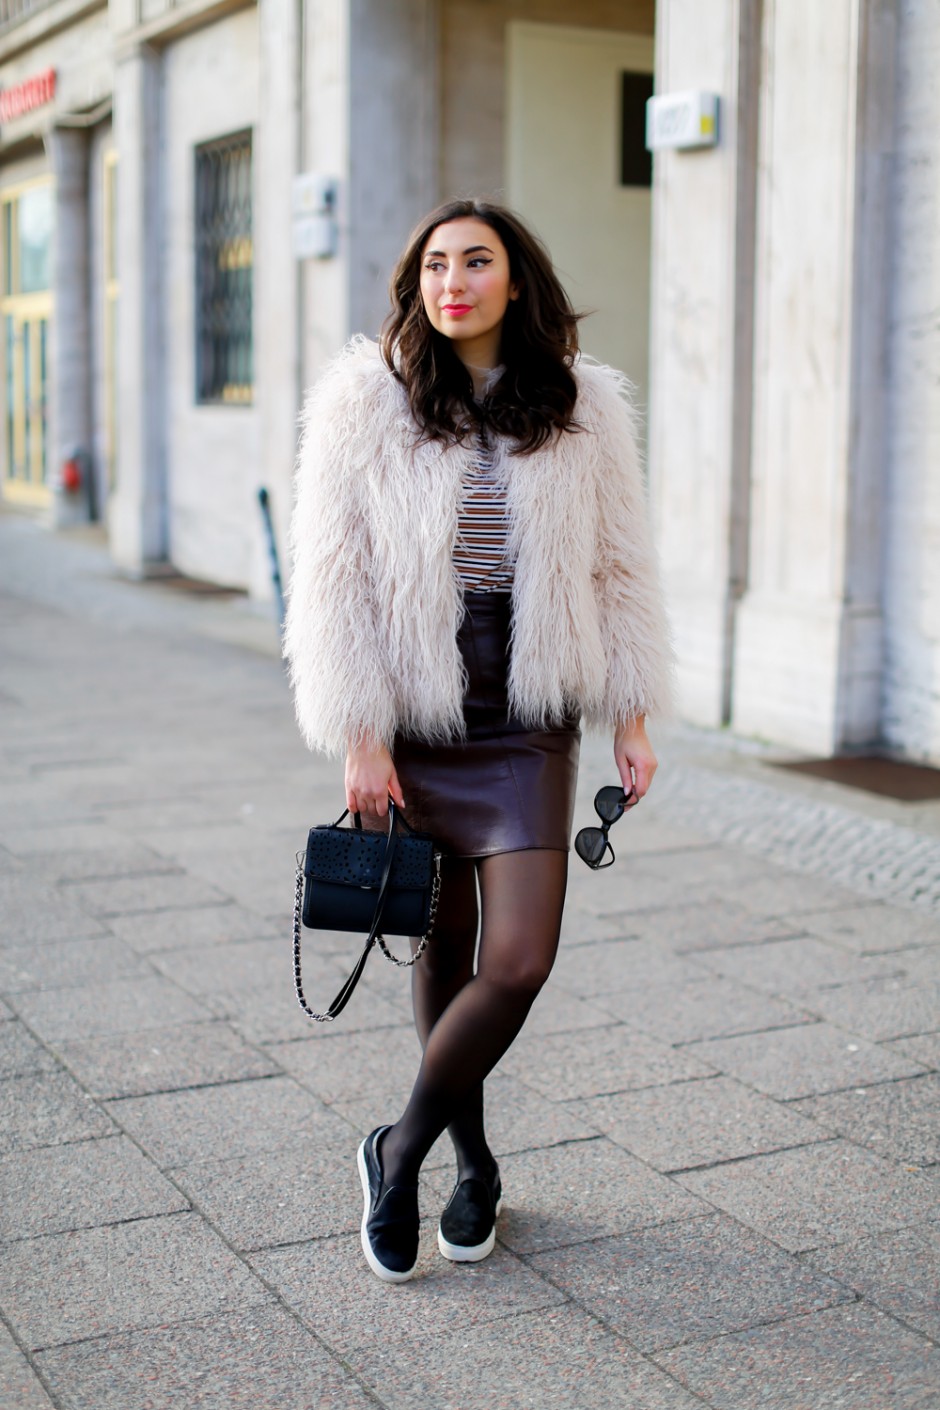 Transition to Spring // Leather Mini Skirt and Fuzzy Jacket ...